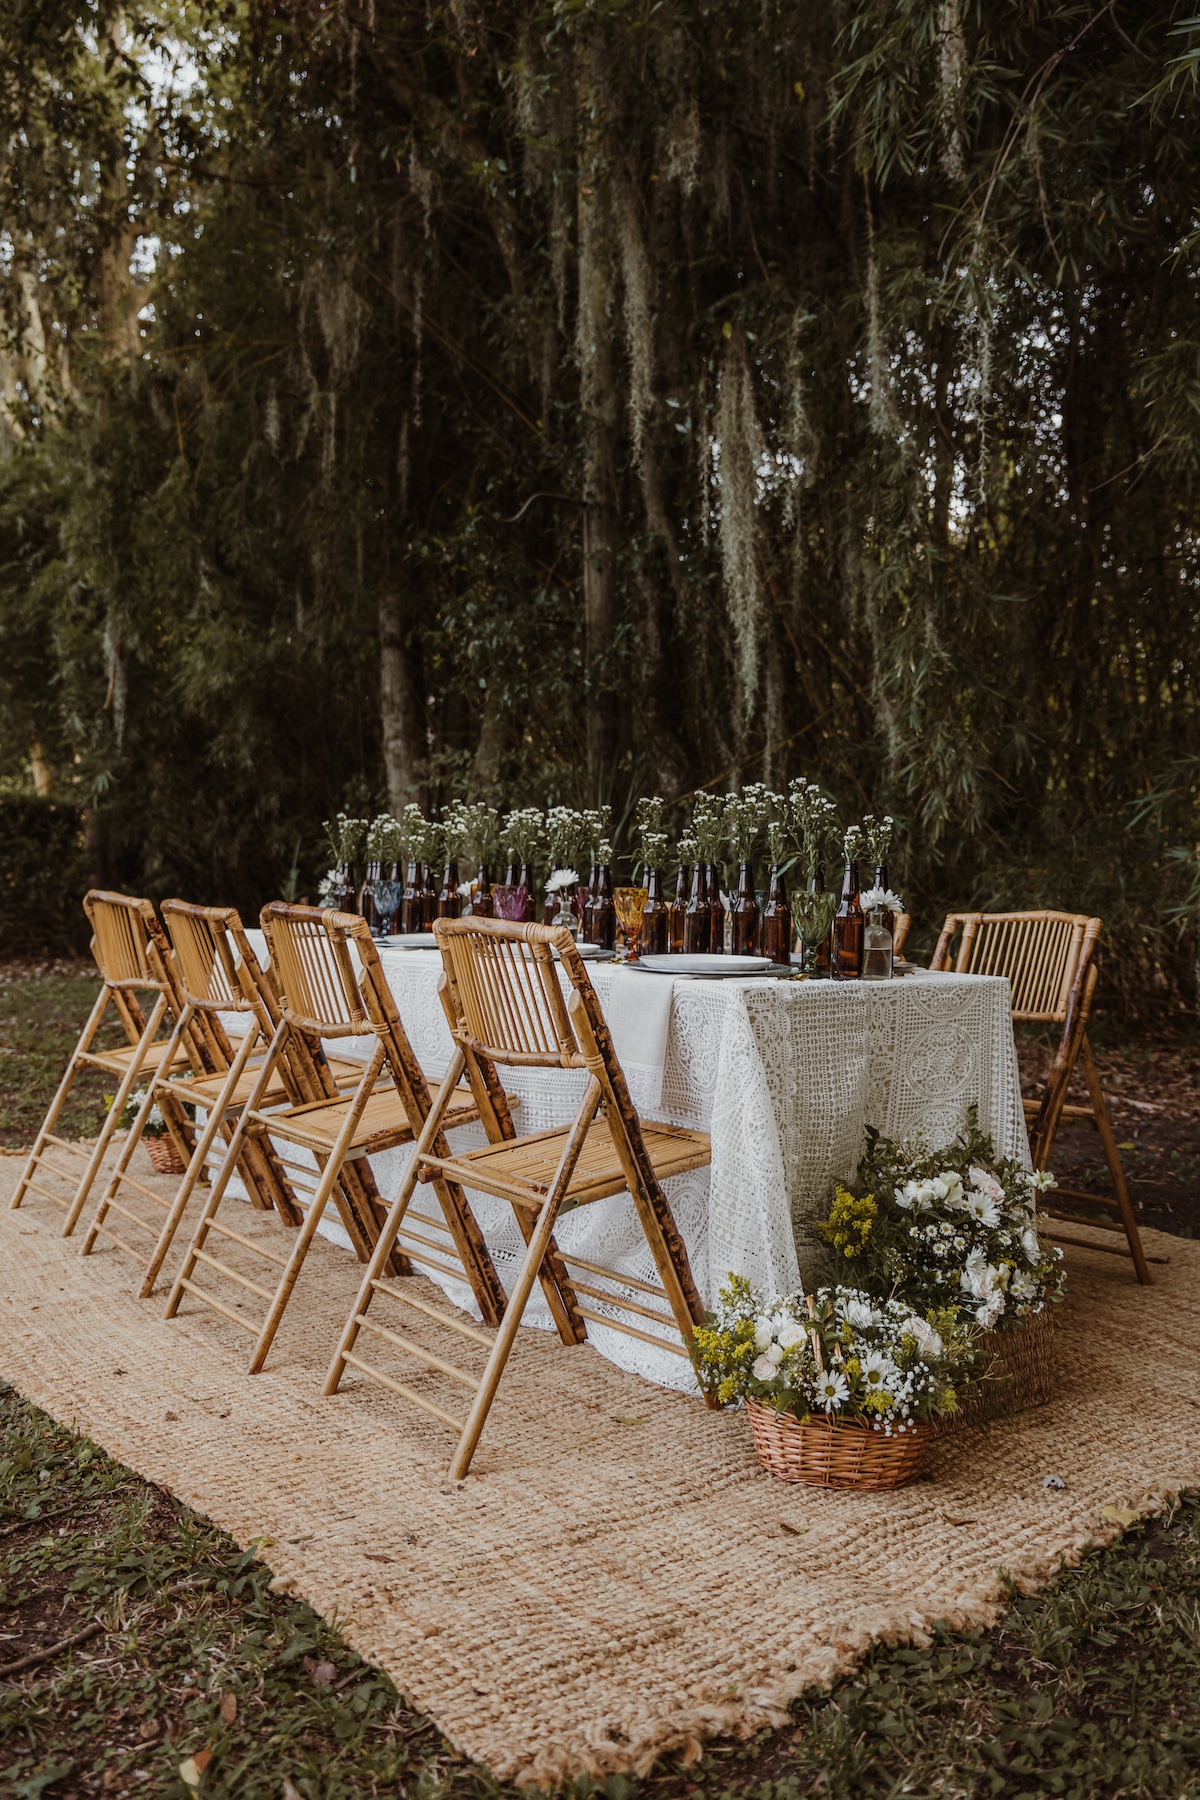 A Quirky Take On A Southern Wedding With A Red Solo Cup Installation That You Have To See